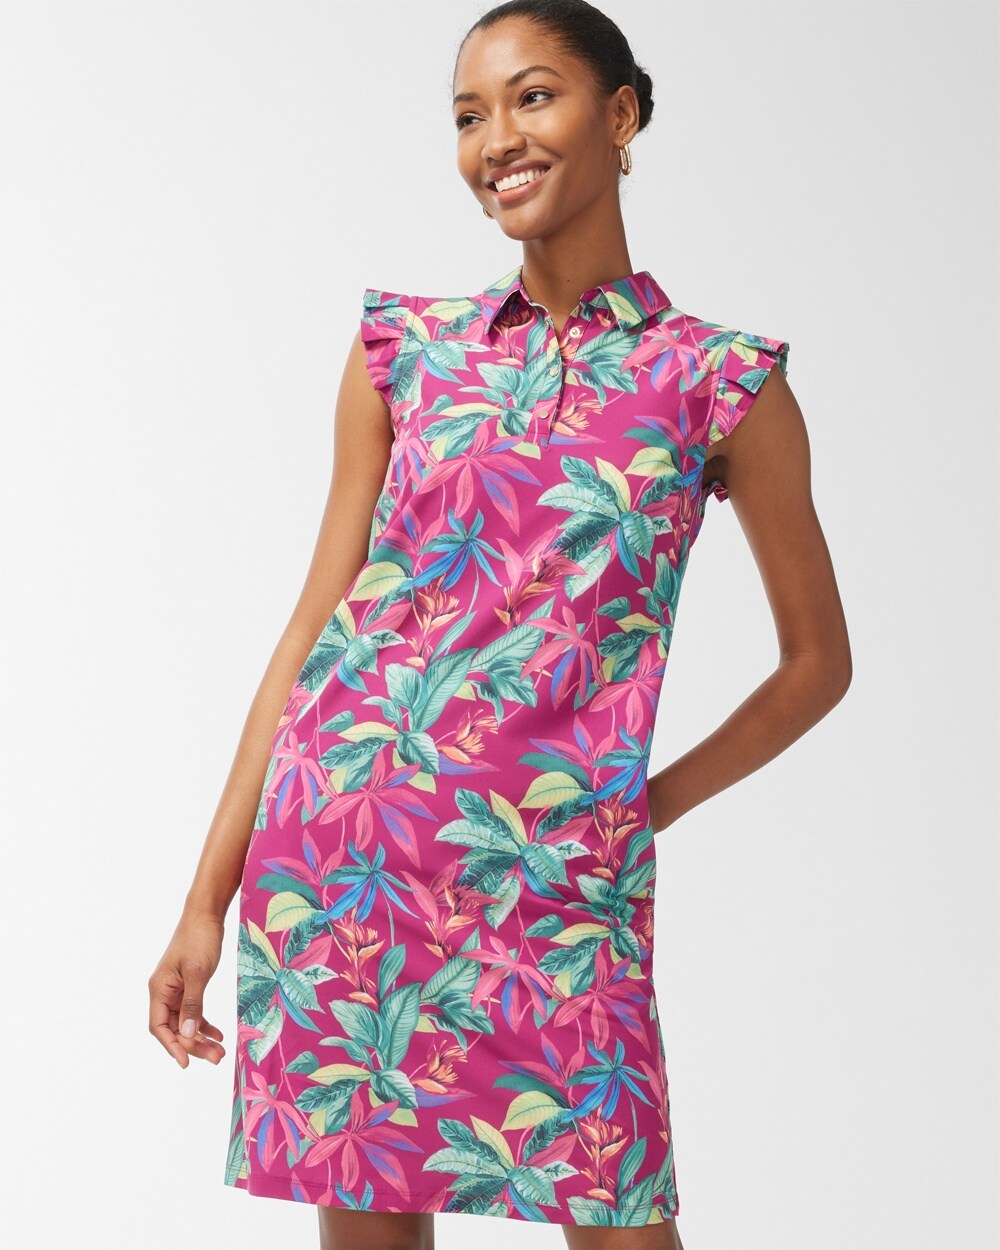 Zenergy UPF Neema Floral Ruffle Dress video preview image, click to start video